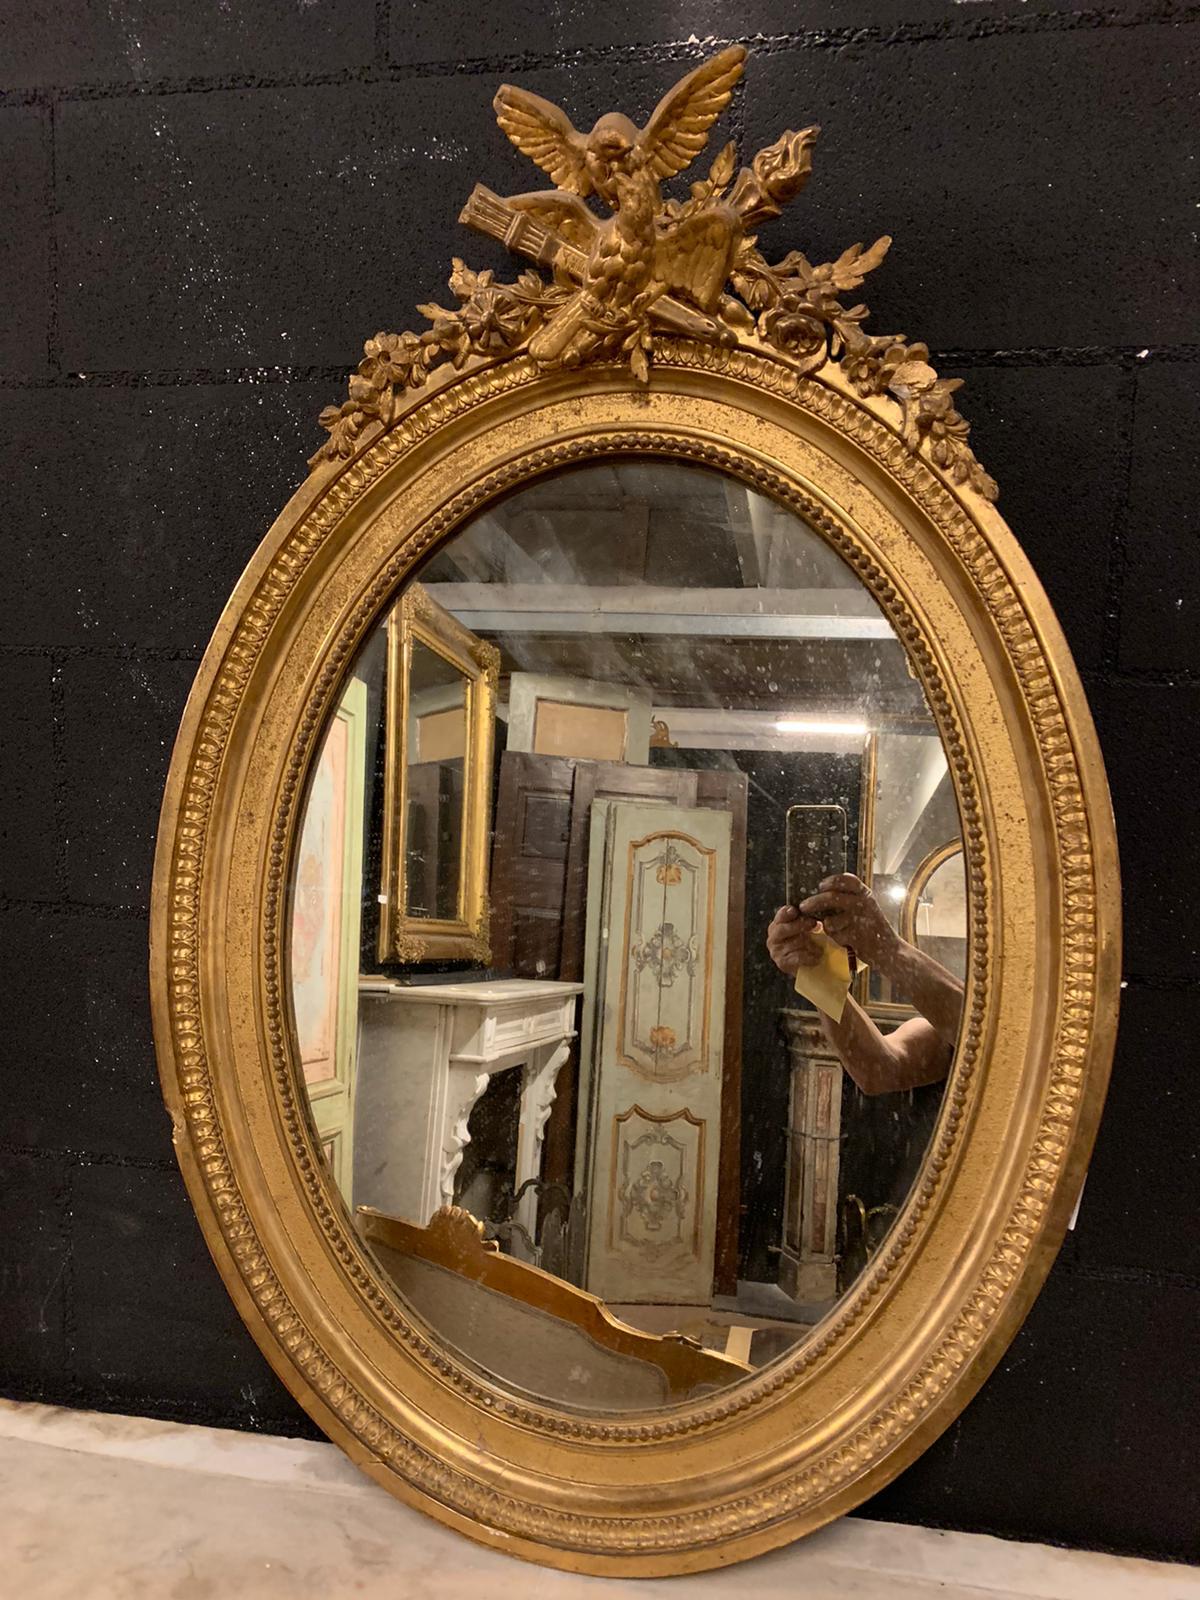 Antique oval mirror in gilded wood, hand-carved with ancient symbols such as the little bird (lucky charm), arrows and flames, hand-built in the 19th century in Italy.
Good size and beautiful shape, richly sculpted but also simply elegant, ideal as